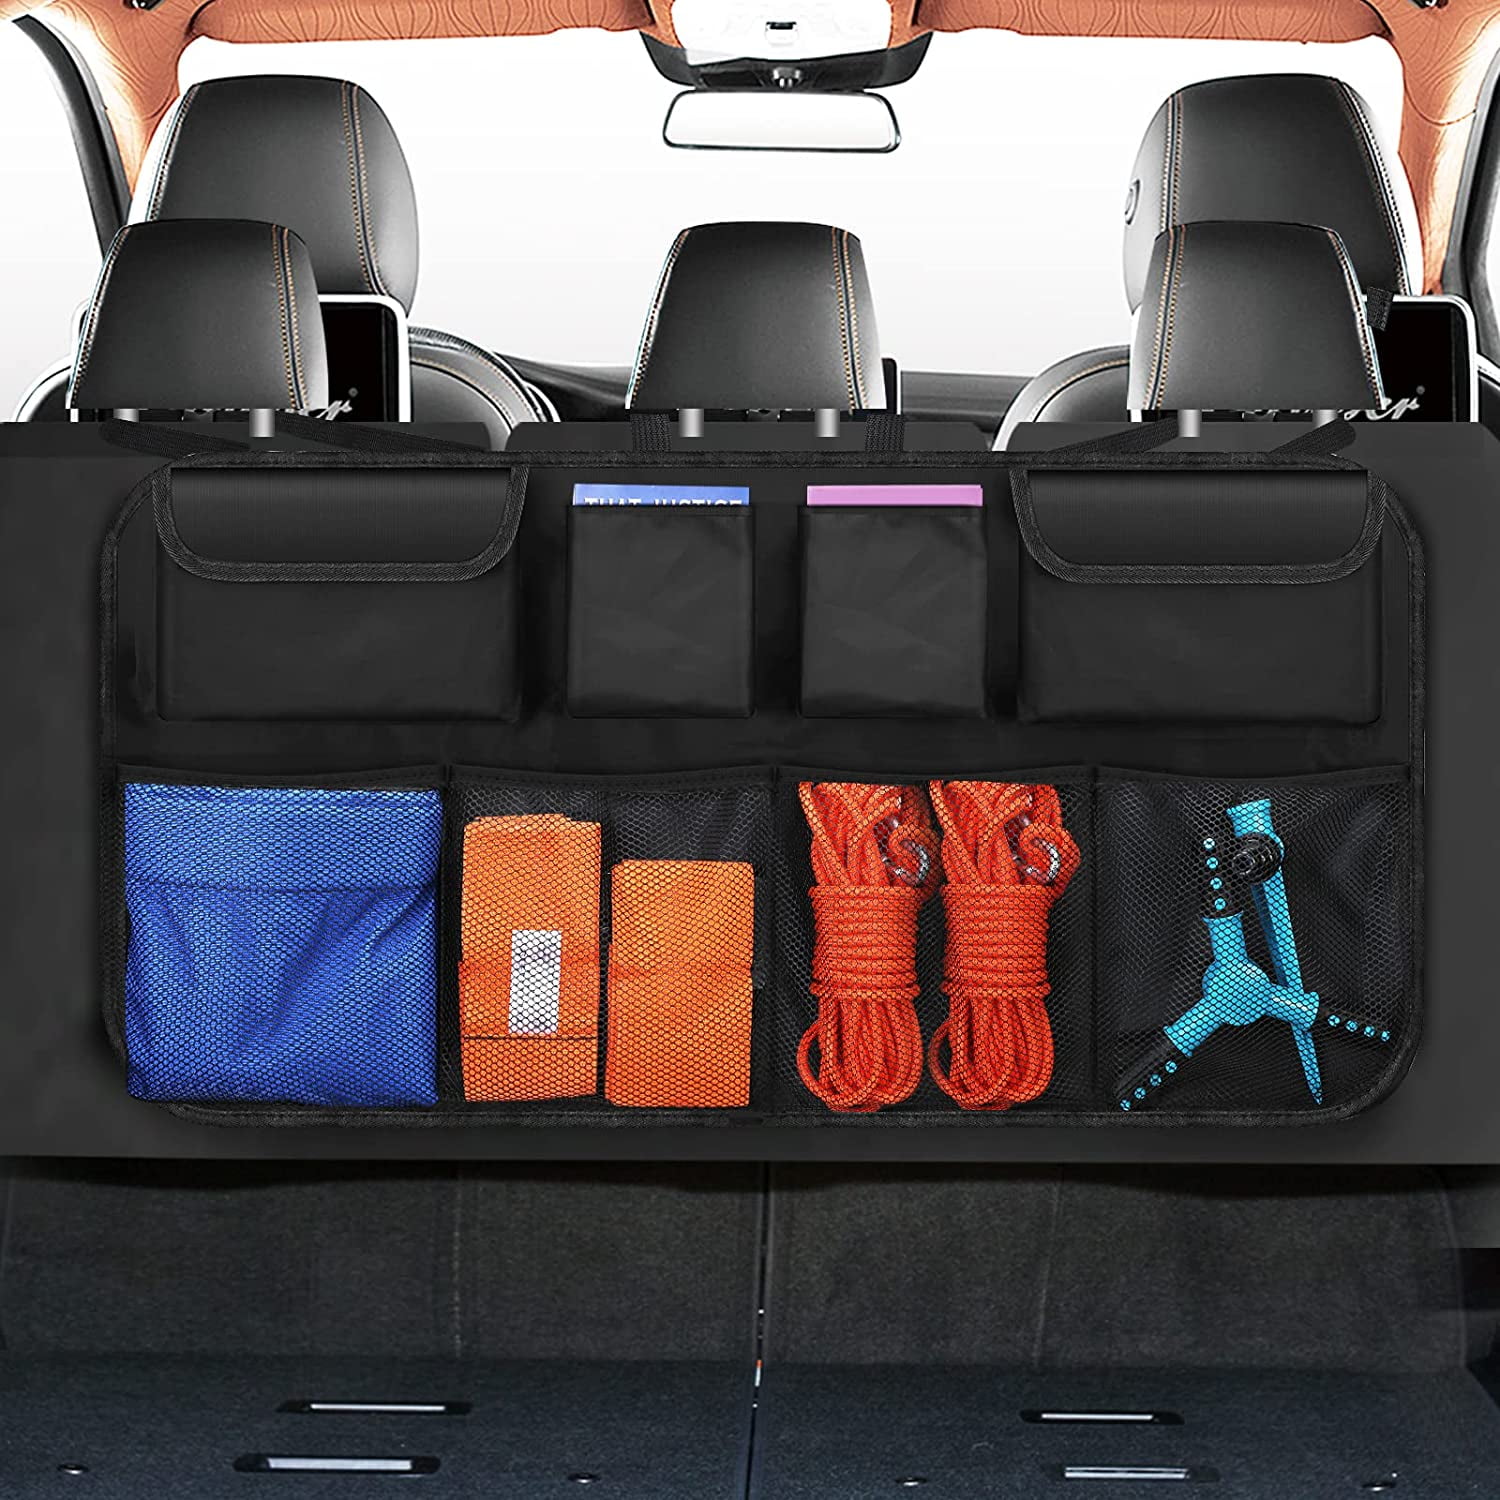 Car Organizer,Collapsible Trunk Organizer,Car Organizers And